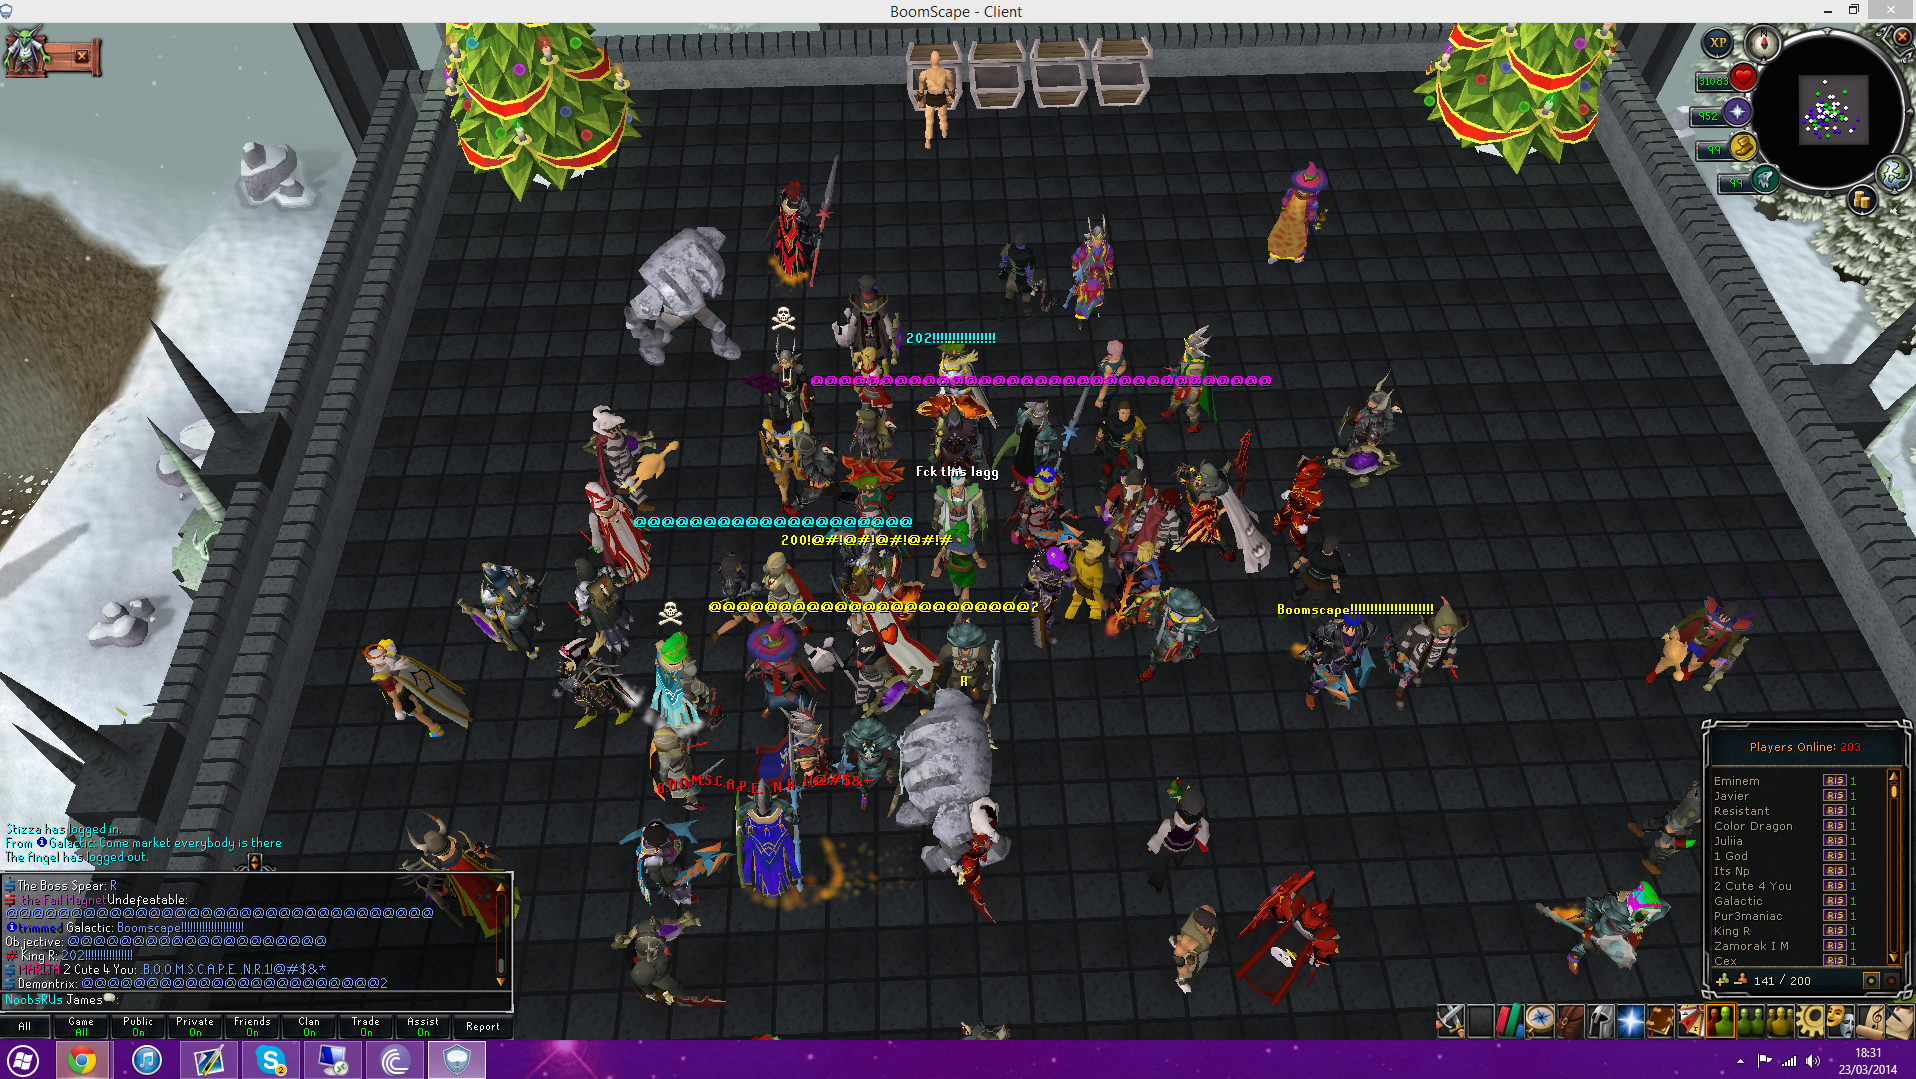 82f77f2f34a0819ce74f1fb3ca4b5db9 - ★ BoomScape ★ Custom Dung ★ Duel Arena ★ Fair Rings ★ Glacors ★ More - RaGEZONE Forums